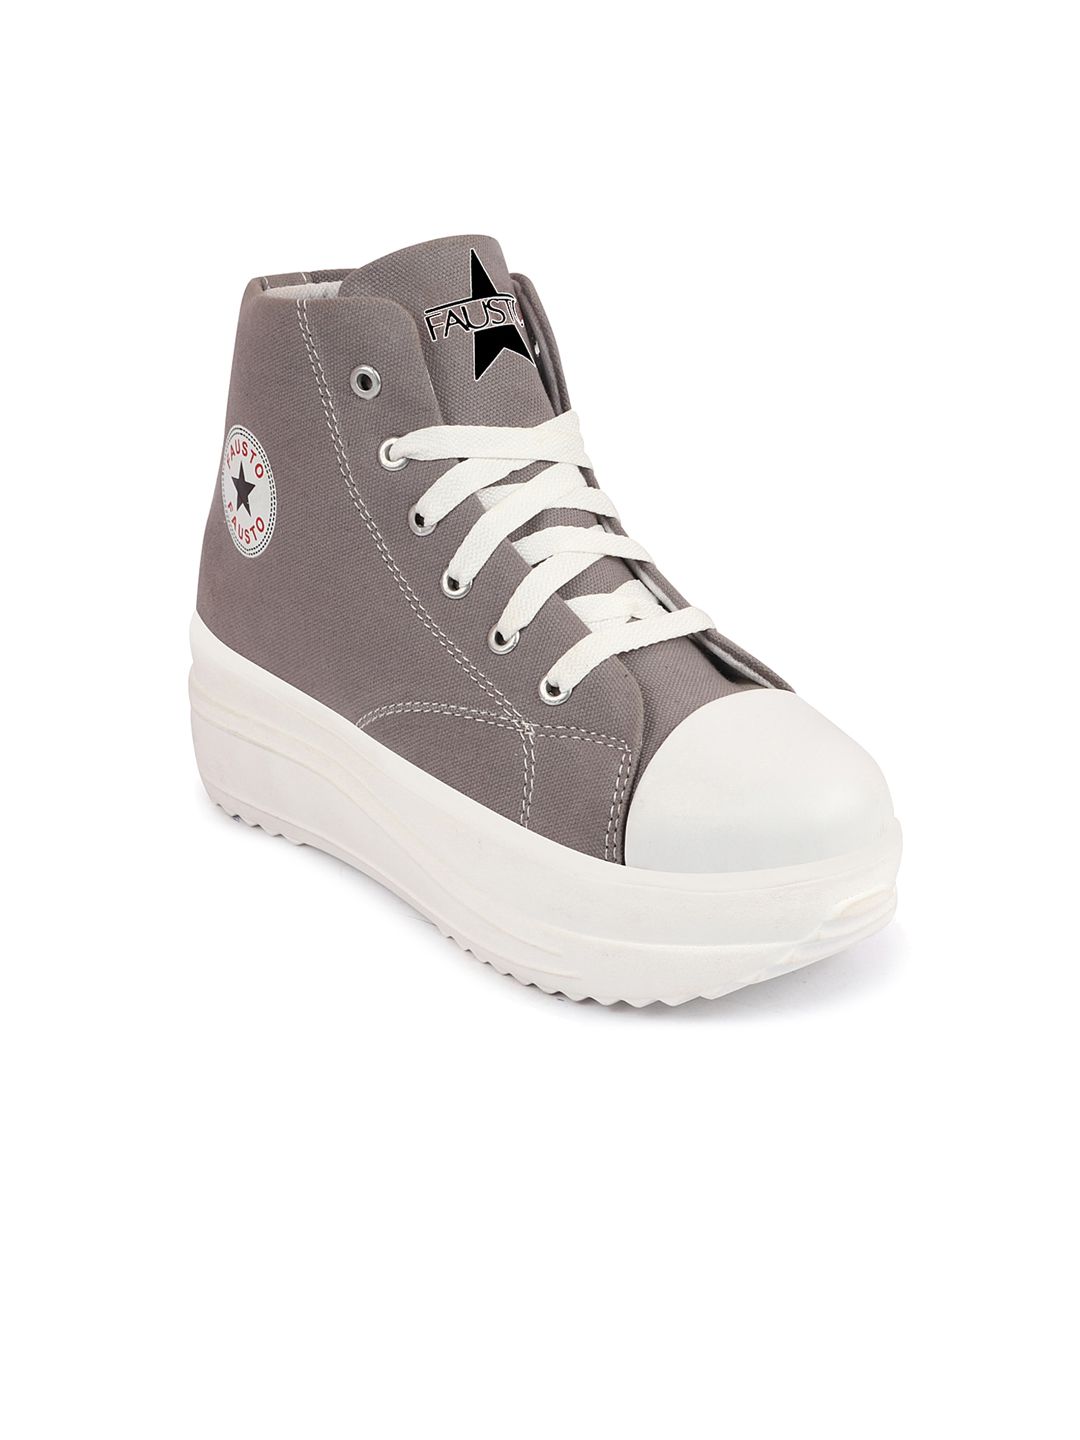 FAUSTO Women Lightweight Mid Top Canvas Sneakers Price in India